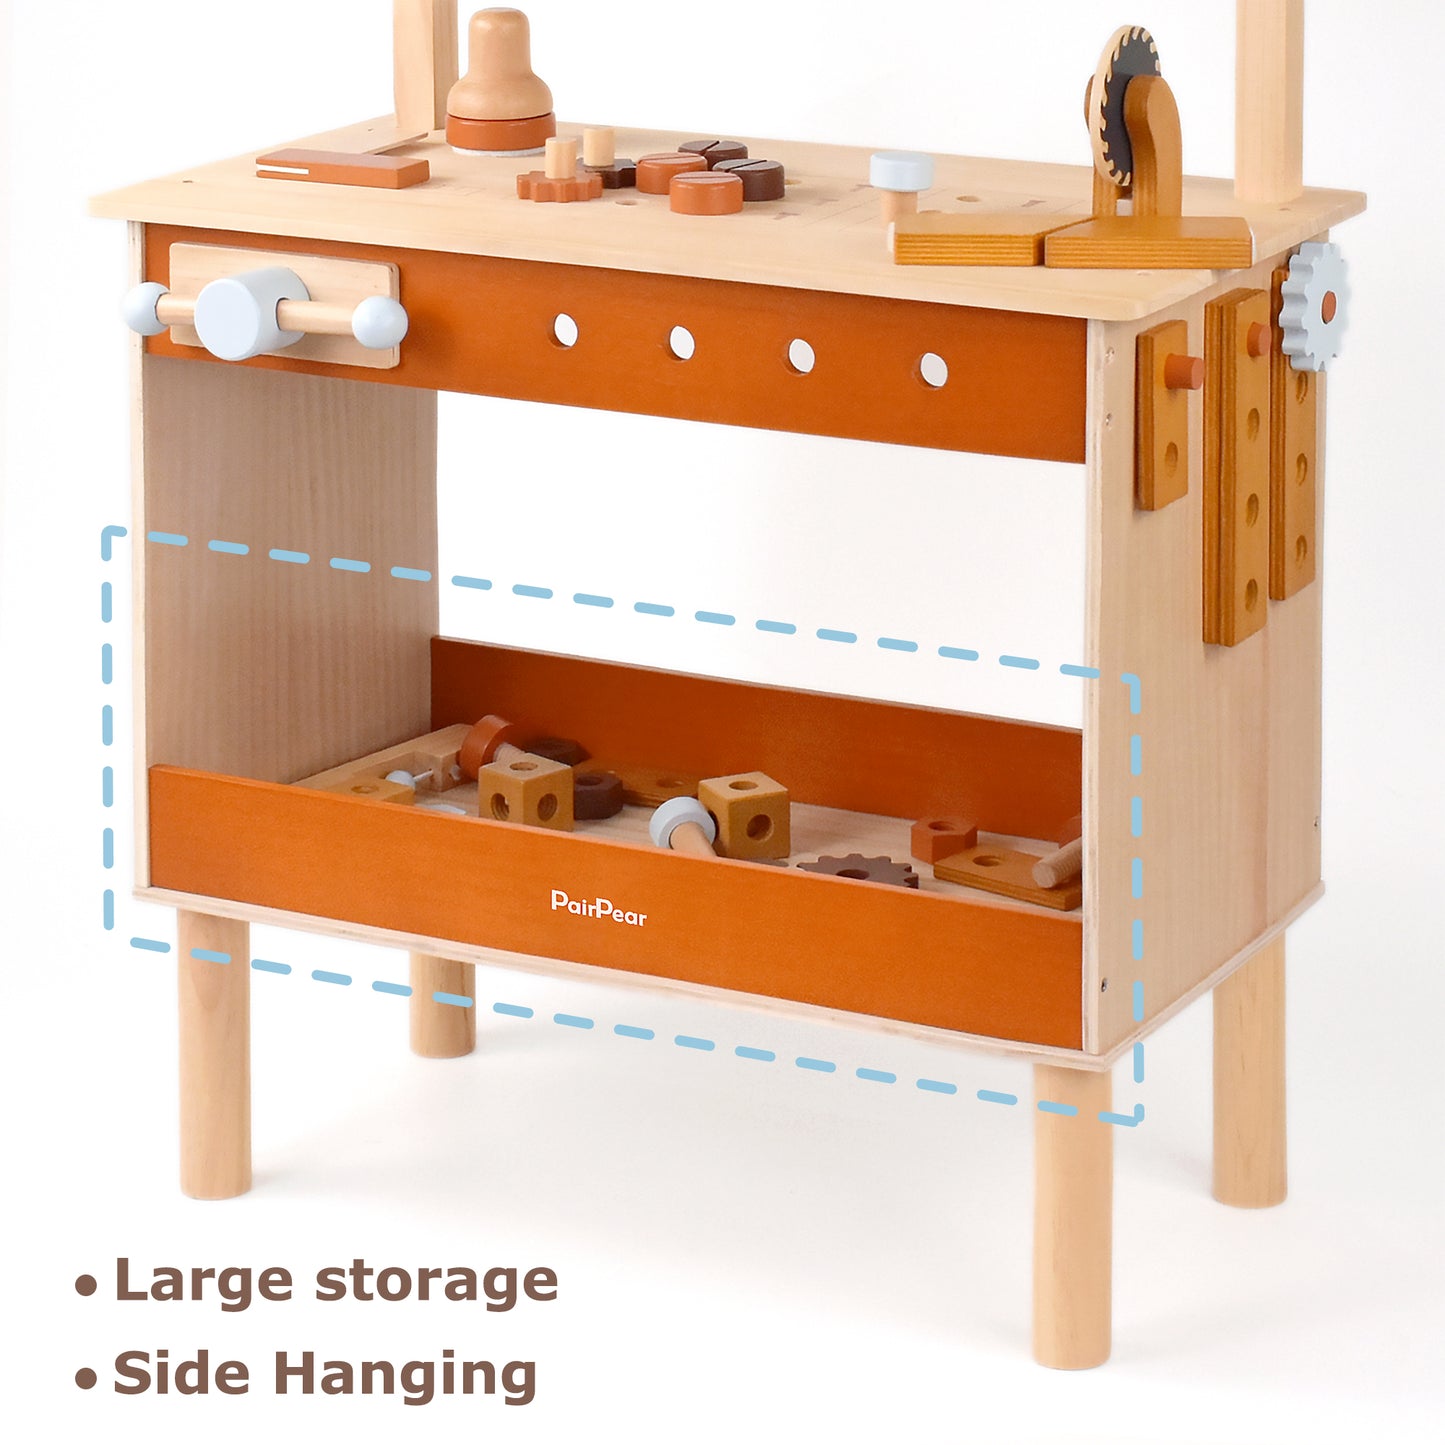 New Pig Tool Storage & Work Benches at